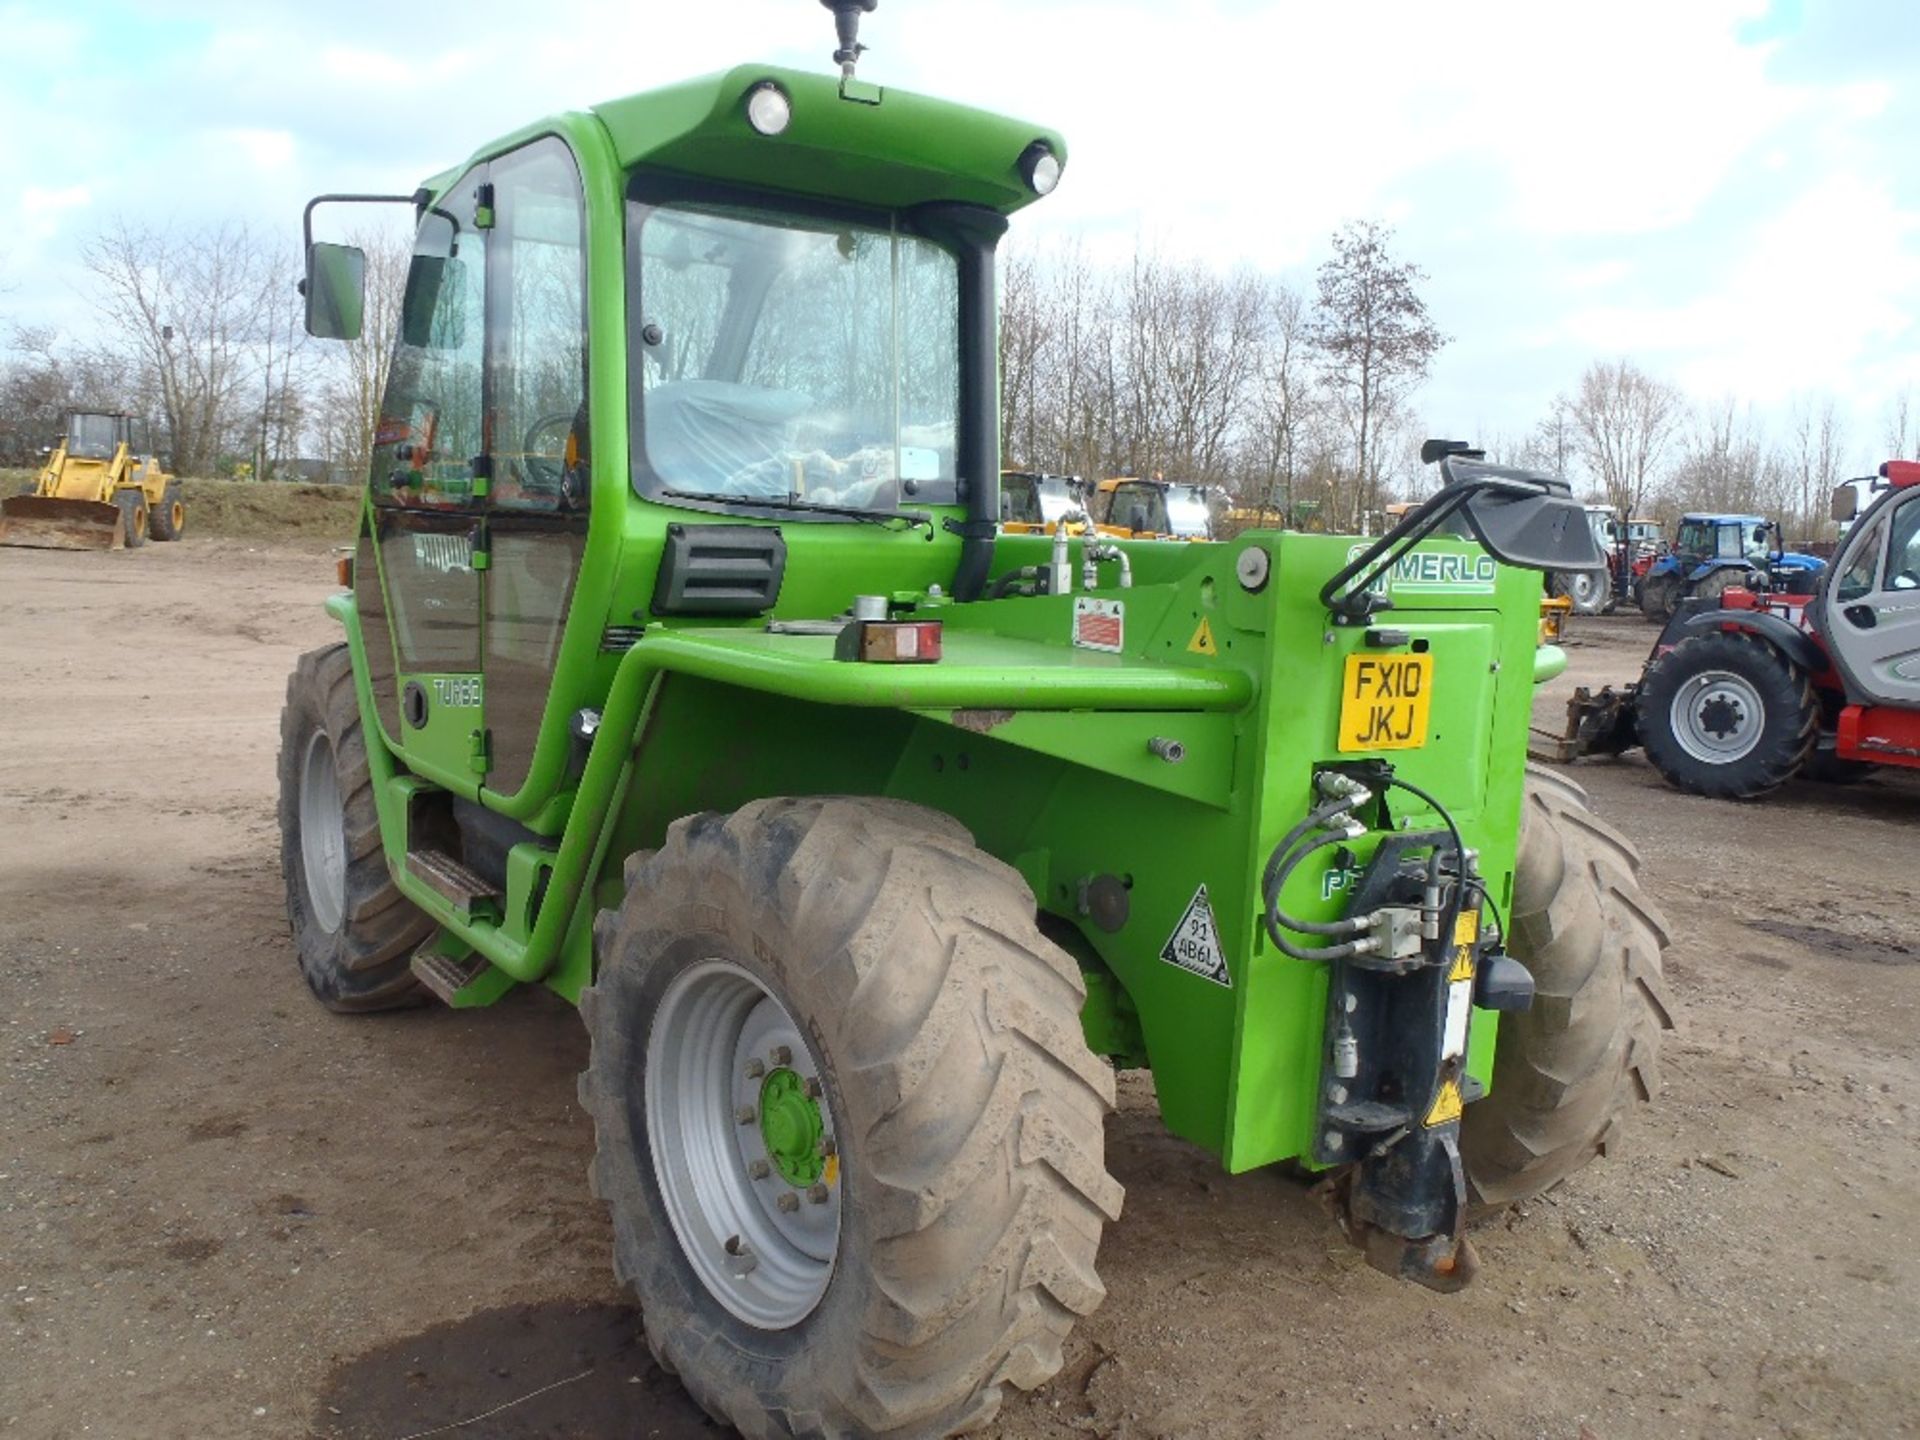 Merlo 34.7 Top Telescopic with Side Shift Carriage. V5 will be supplied. Reg.No. FX10 JKJ Ser No - Image 4 of 5